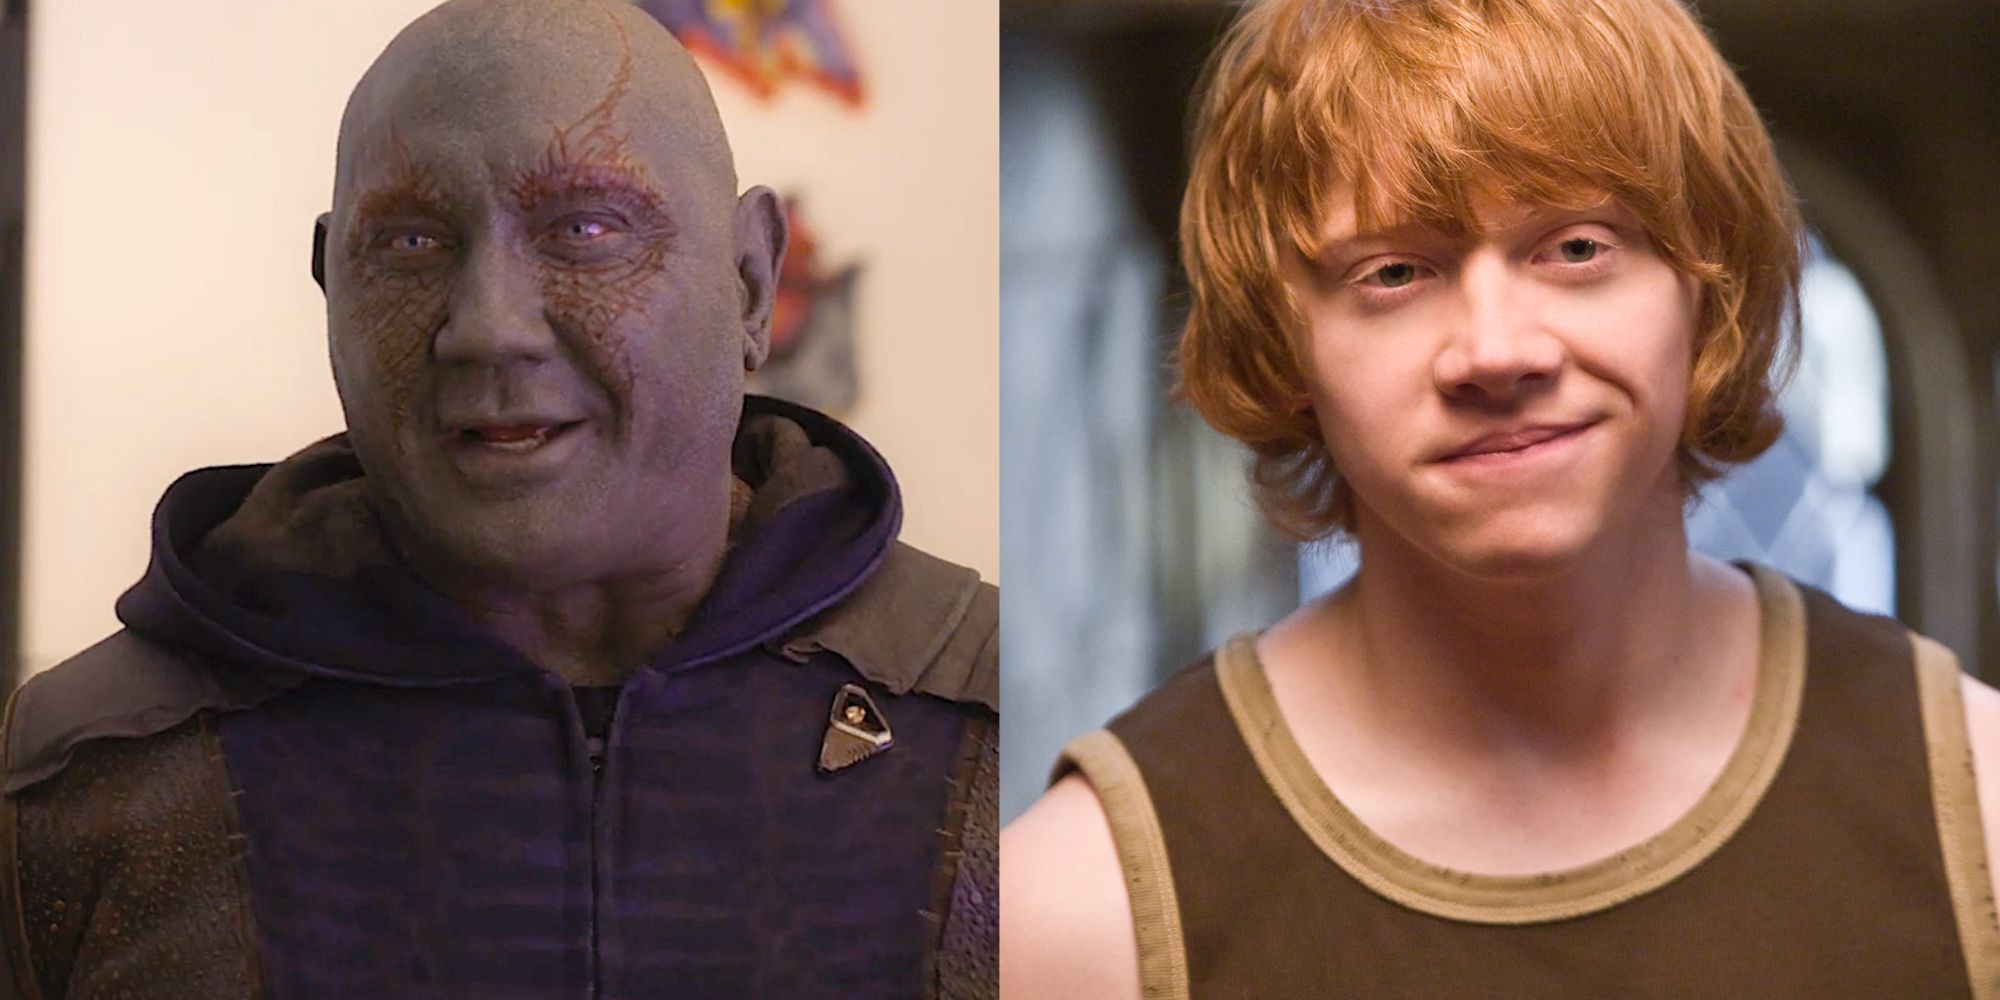 Split images of Drax laughing in Guardians of the Galaxy and Ron Weasley smiling in Harry Potter 5